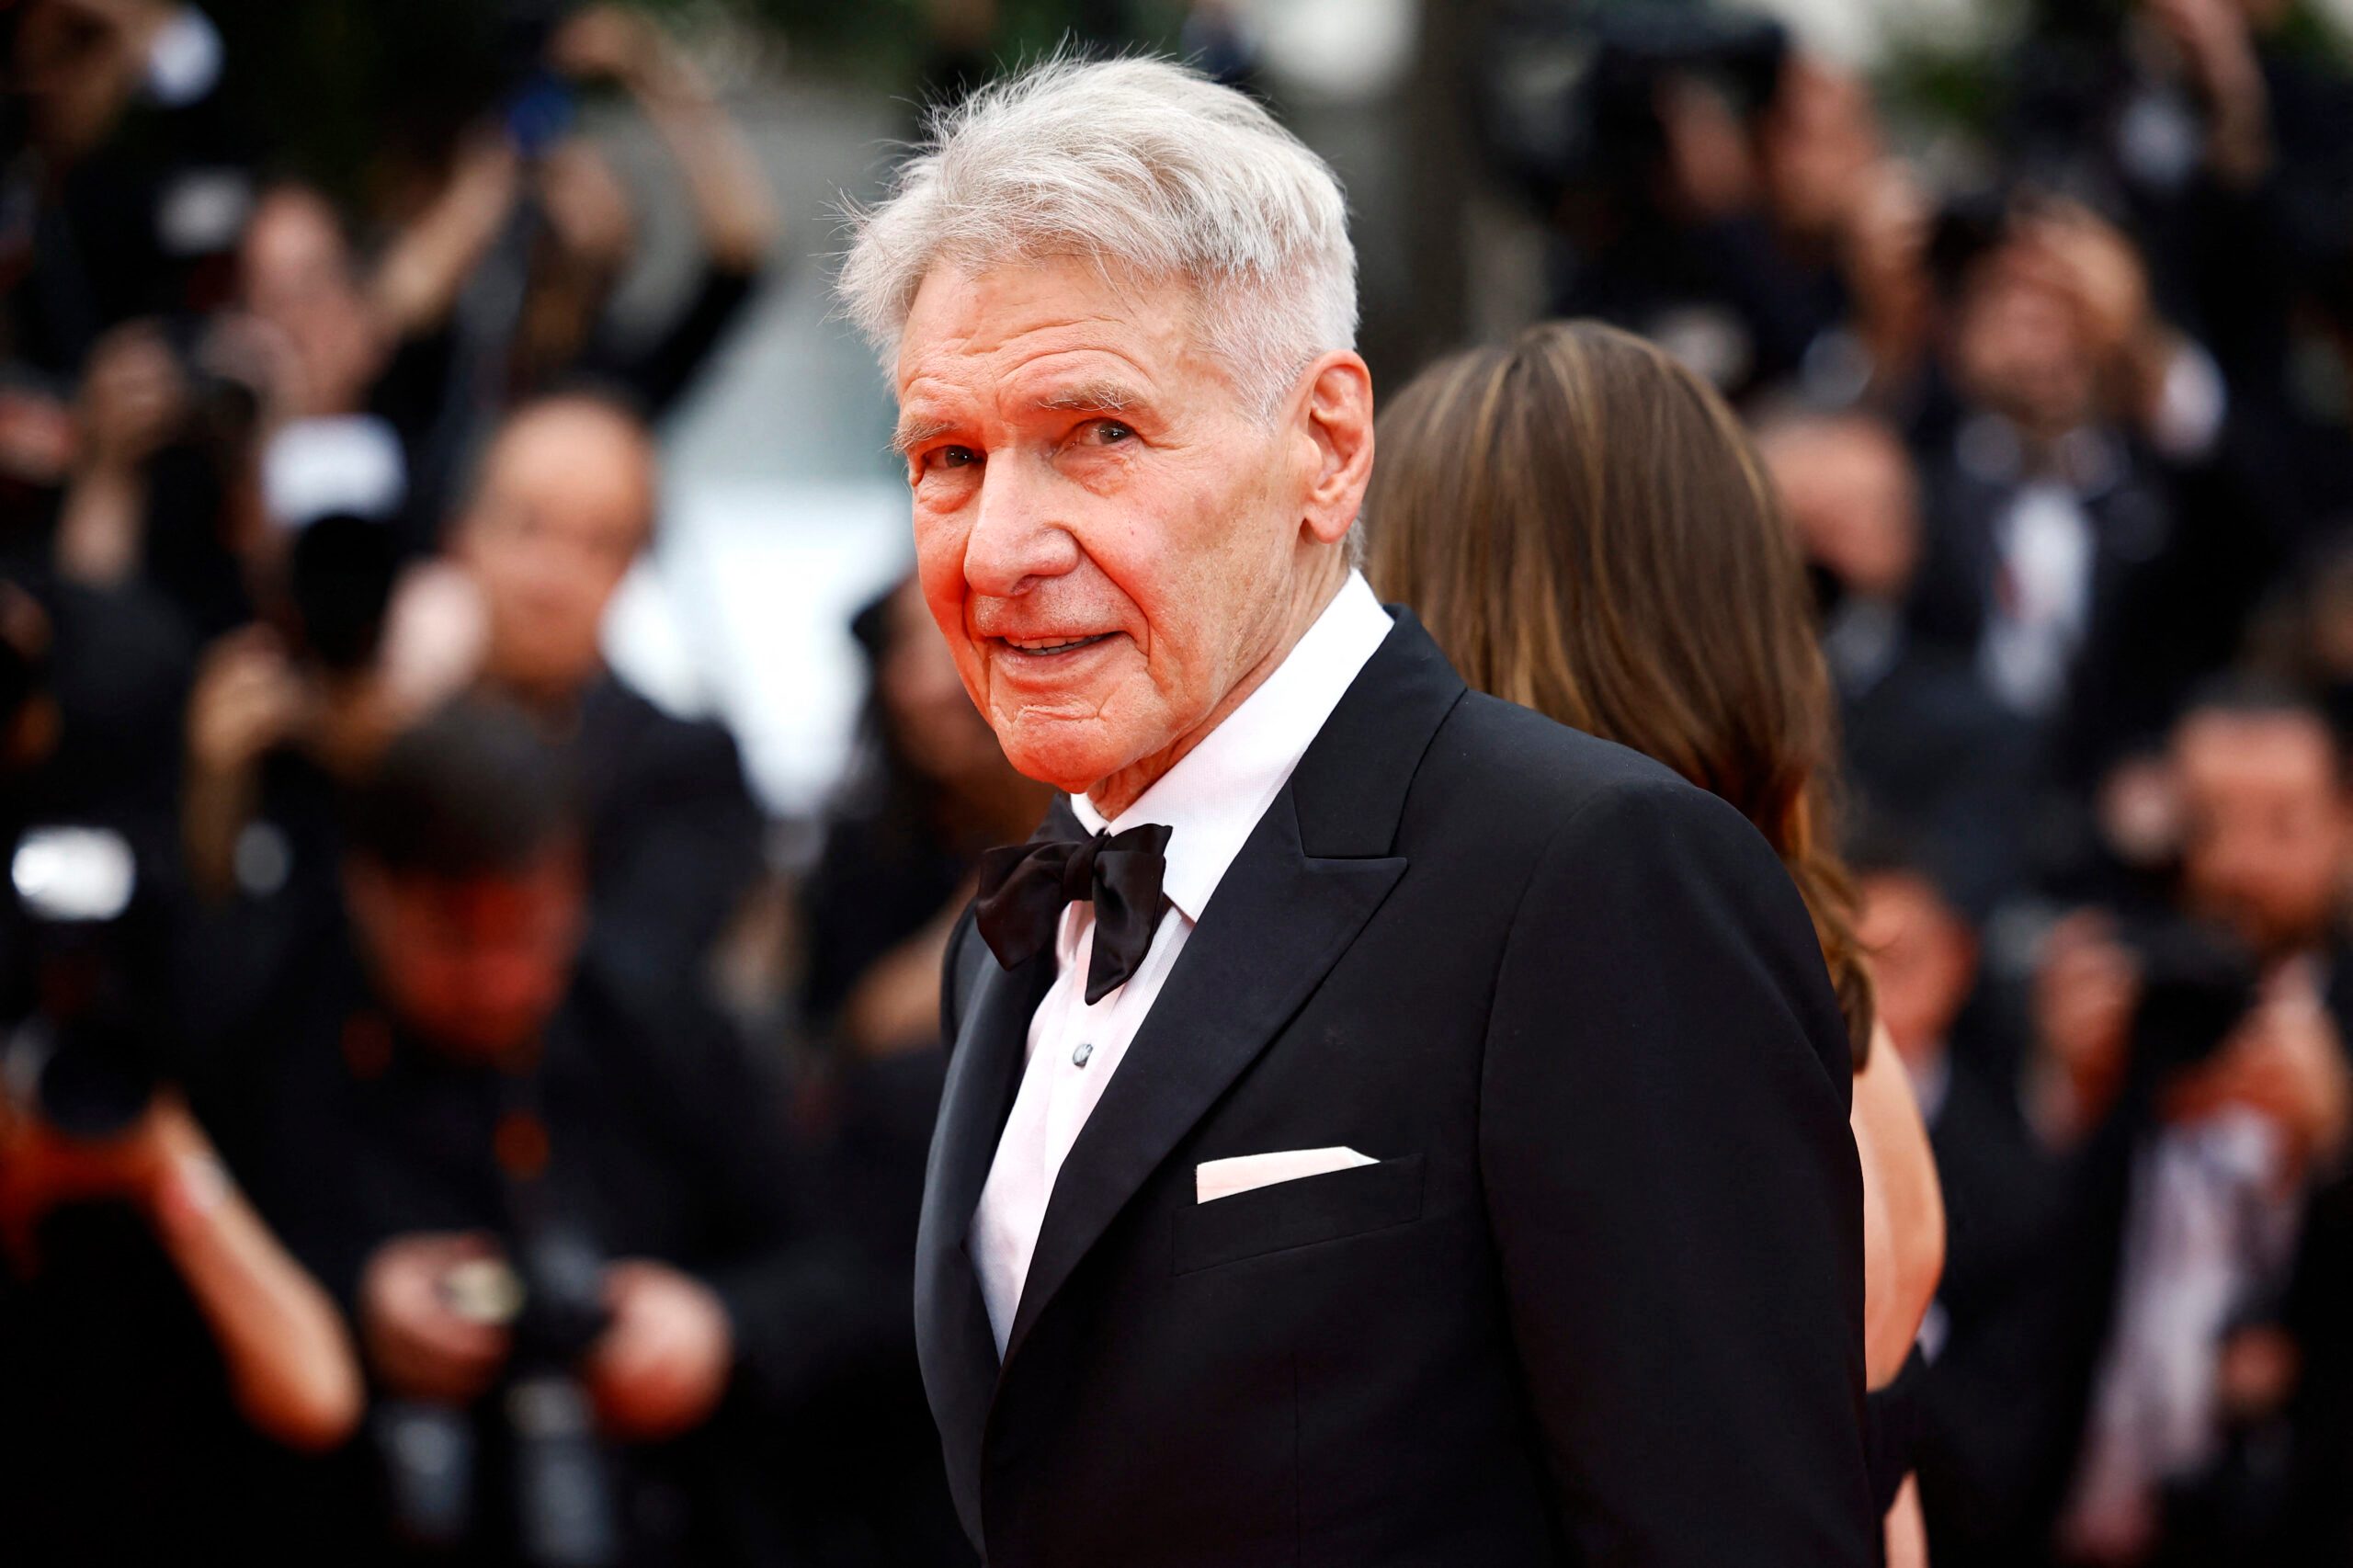 The bullwhip is back: Harrison Ford in Cannes for ‘Indiana Jones’ premiere